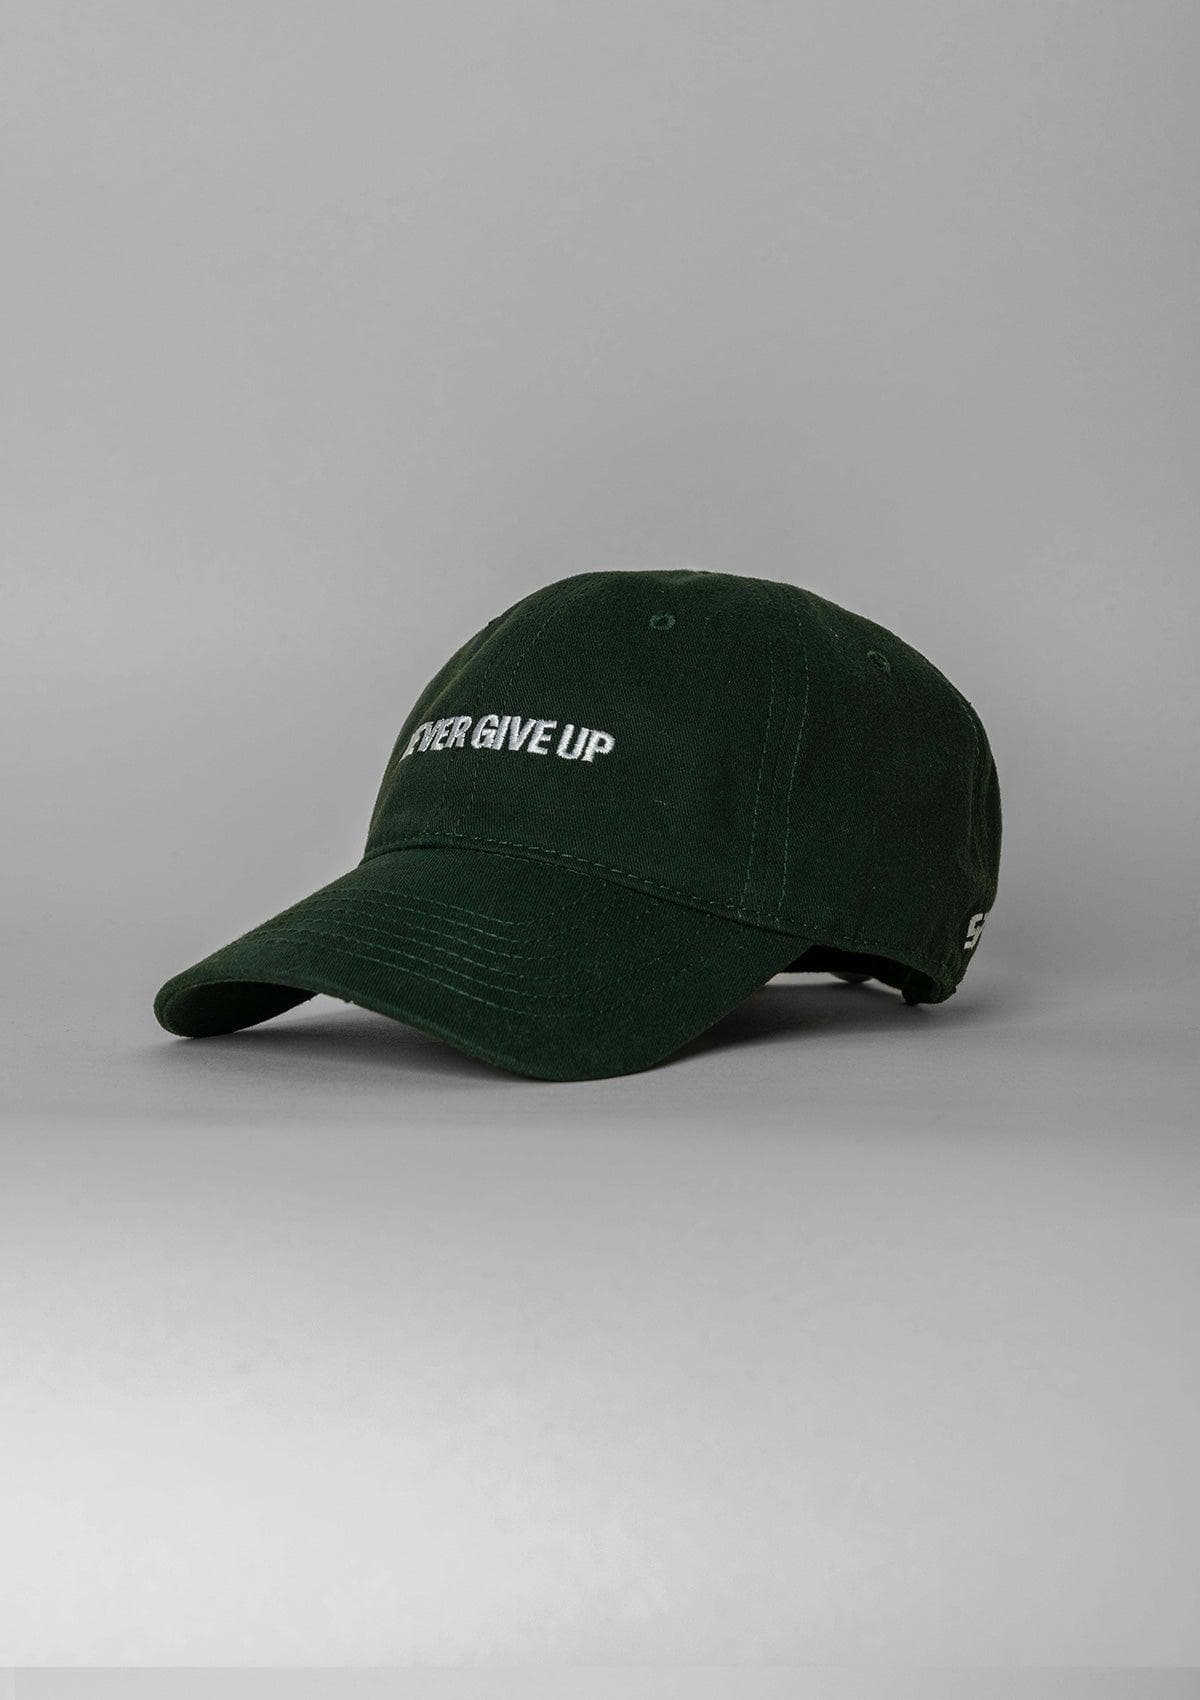 Never Give Up Cap - Green